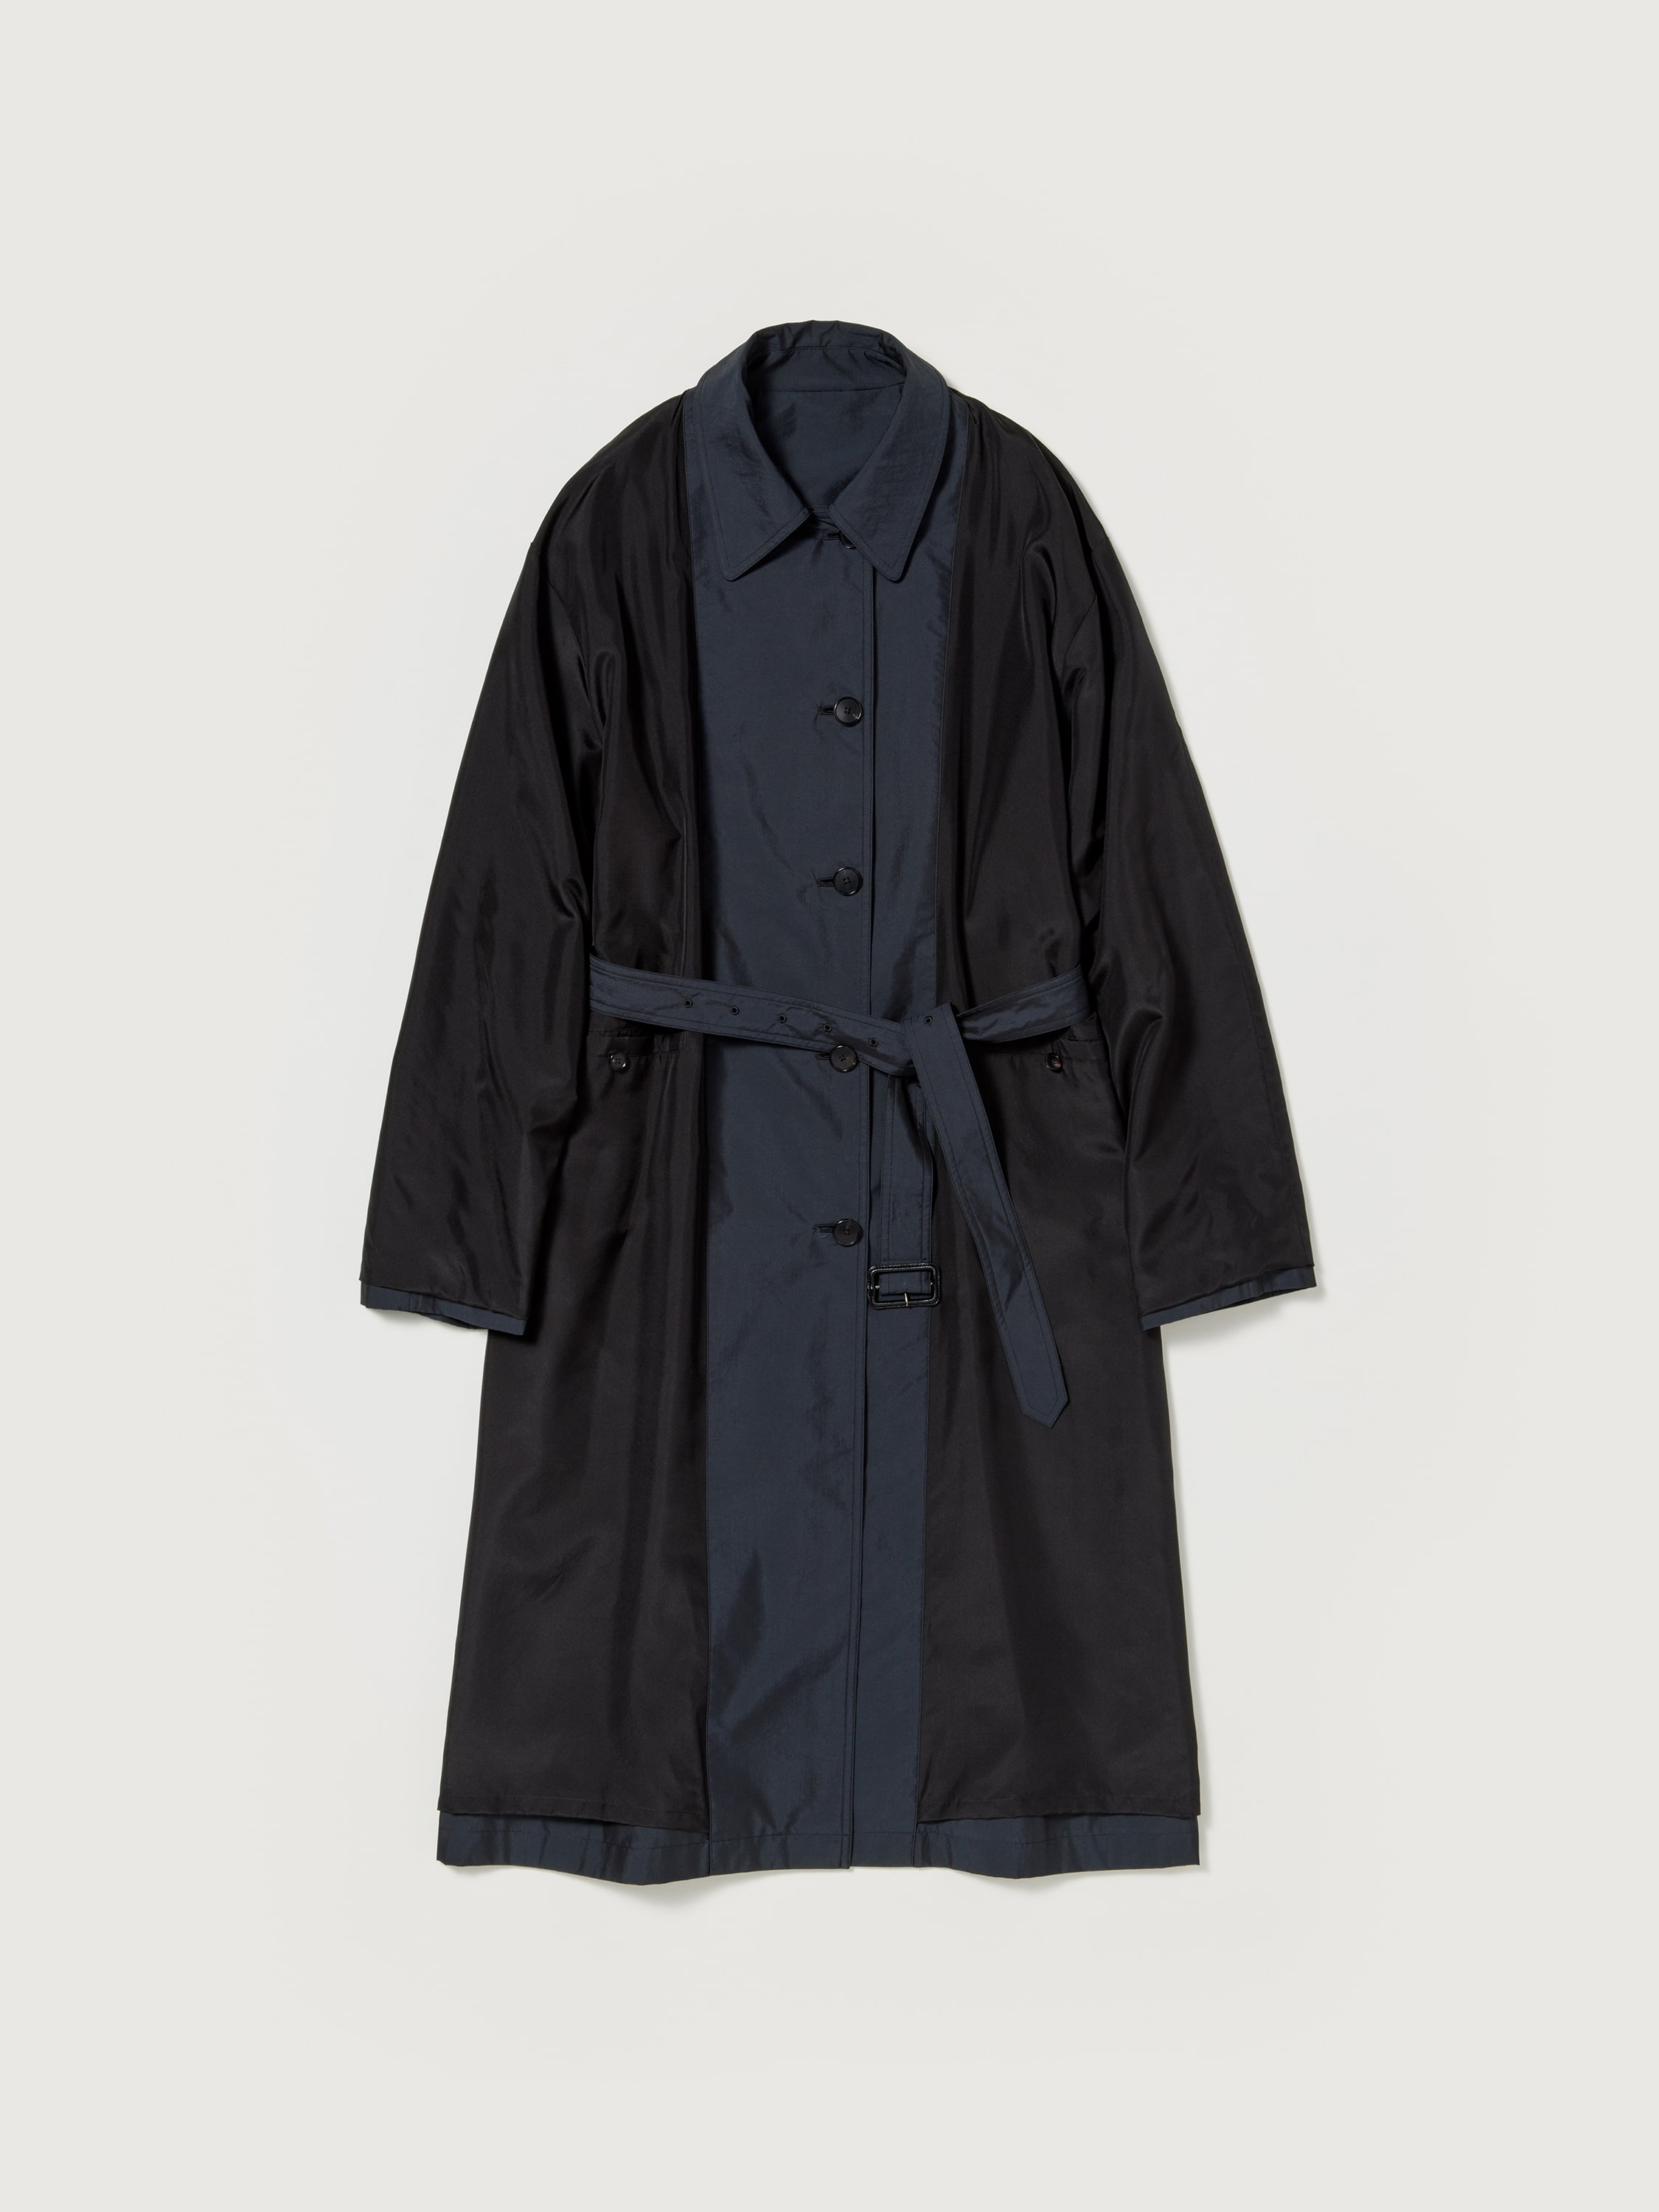 FINX POLYESTER WEATHER CHAMBRAY SOUTIEN COLLAR COAT 詳細画像 BLACK CHAMBRAY 9